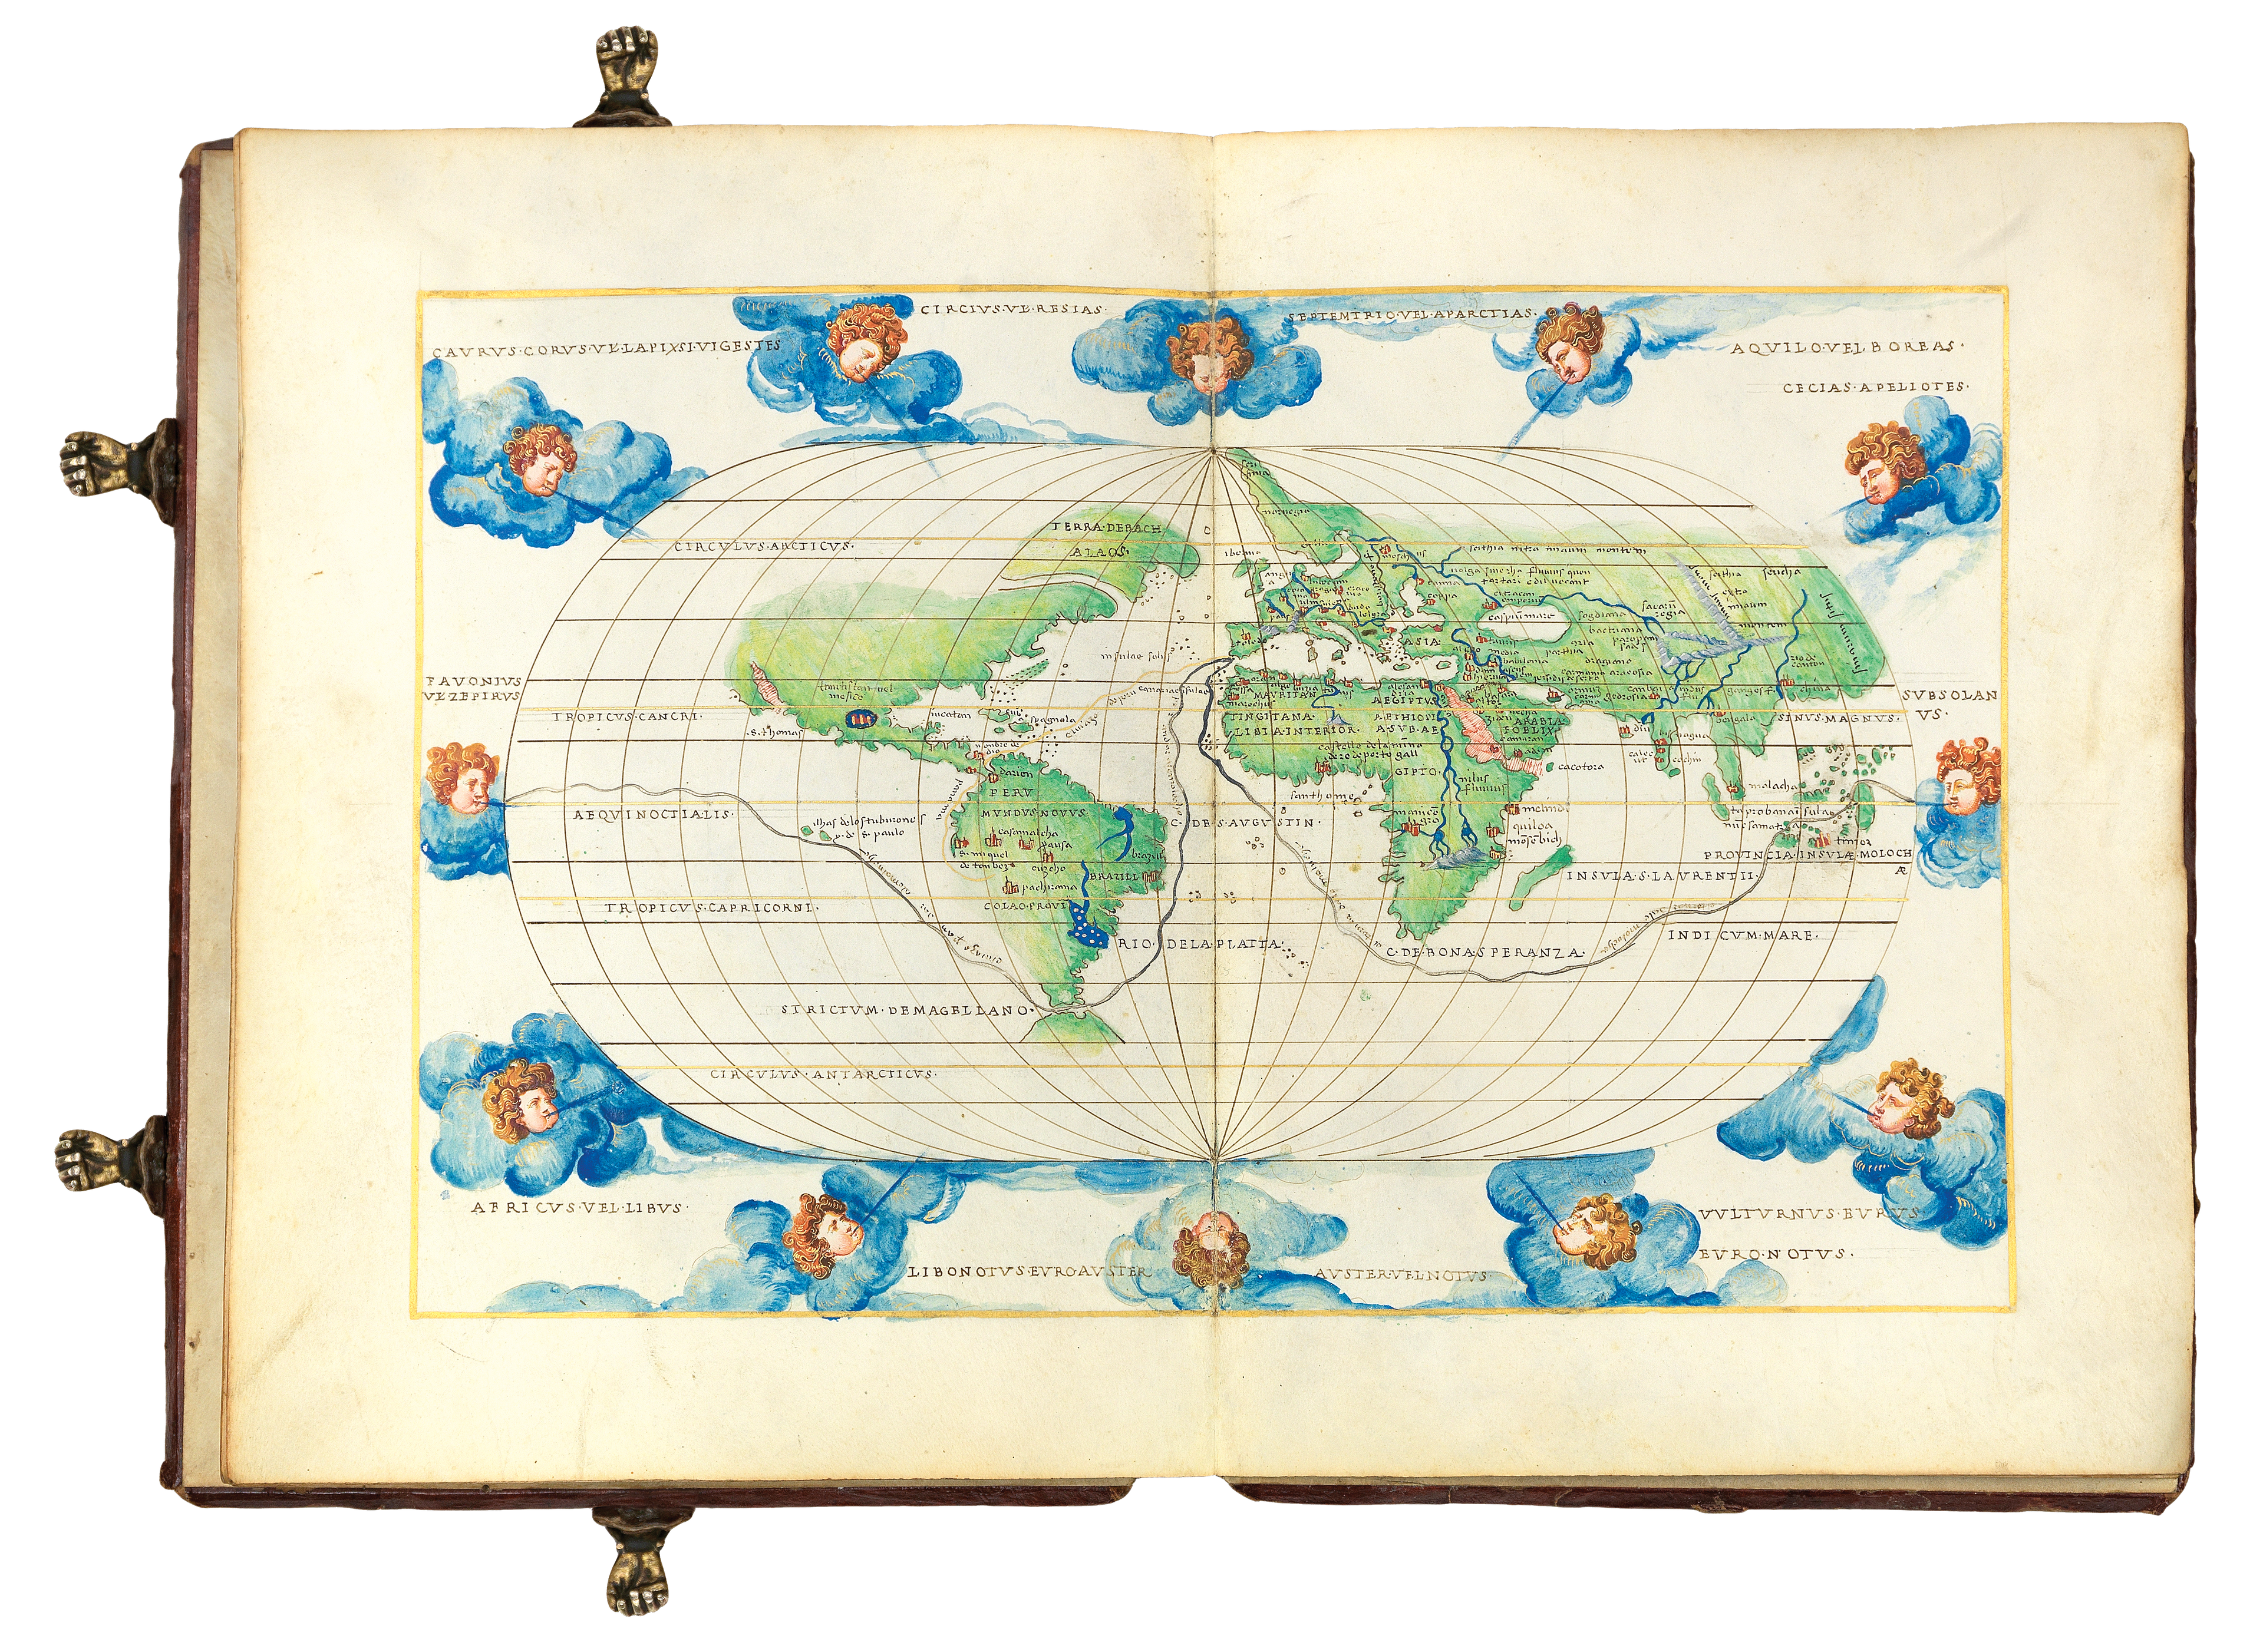 World map from portolan atlas, the Harisse Codex, with 12 Windheads surrounding the Earth.